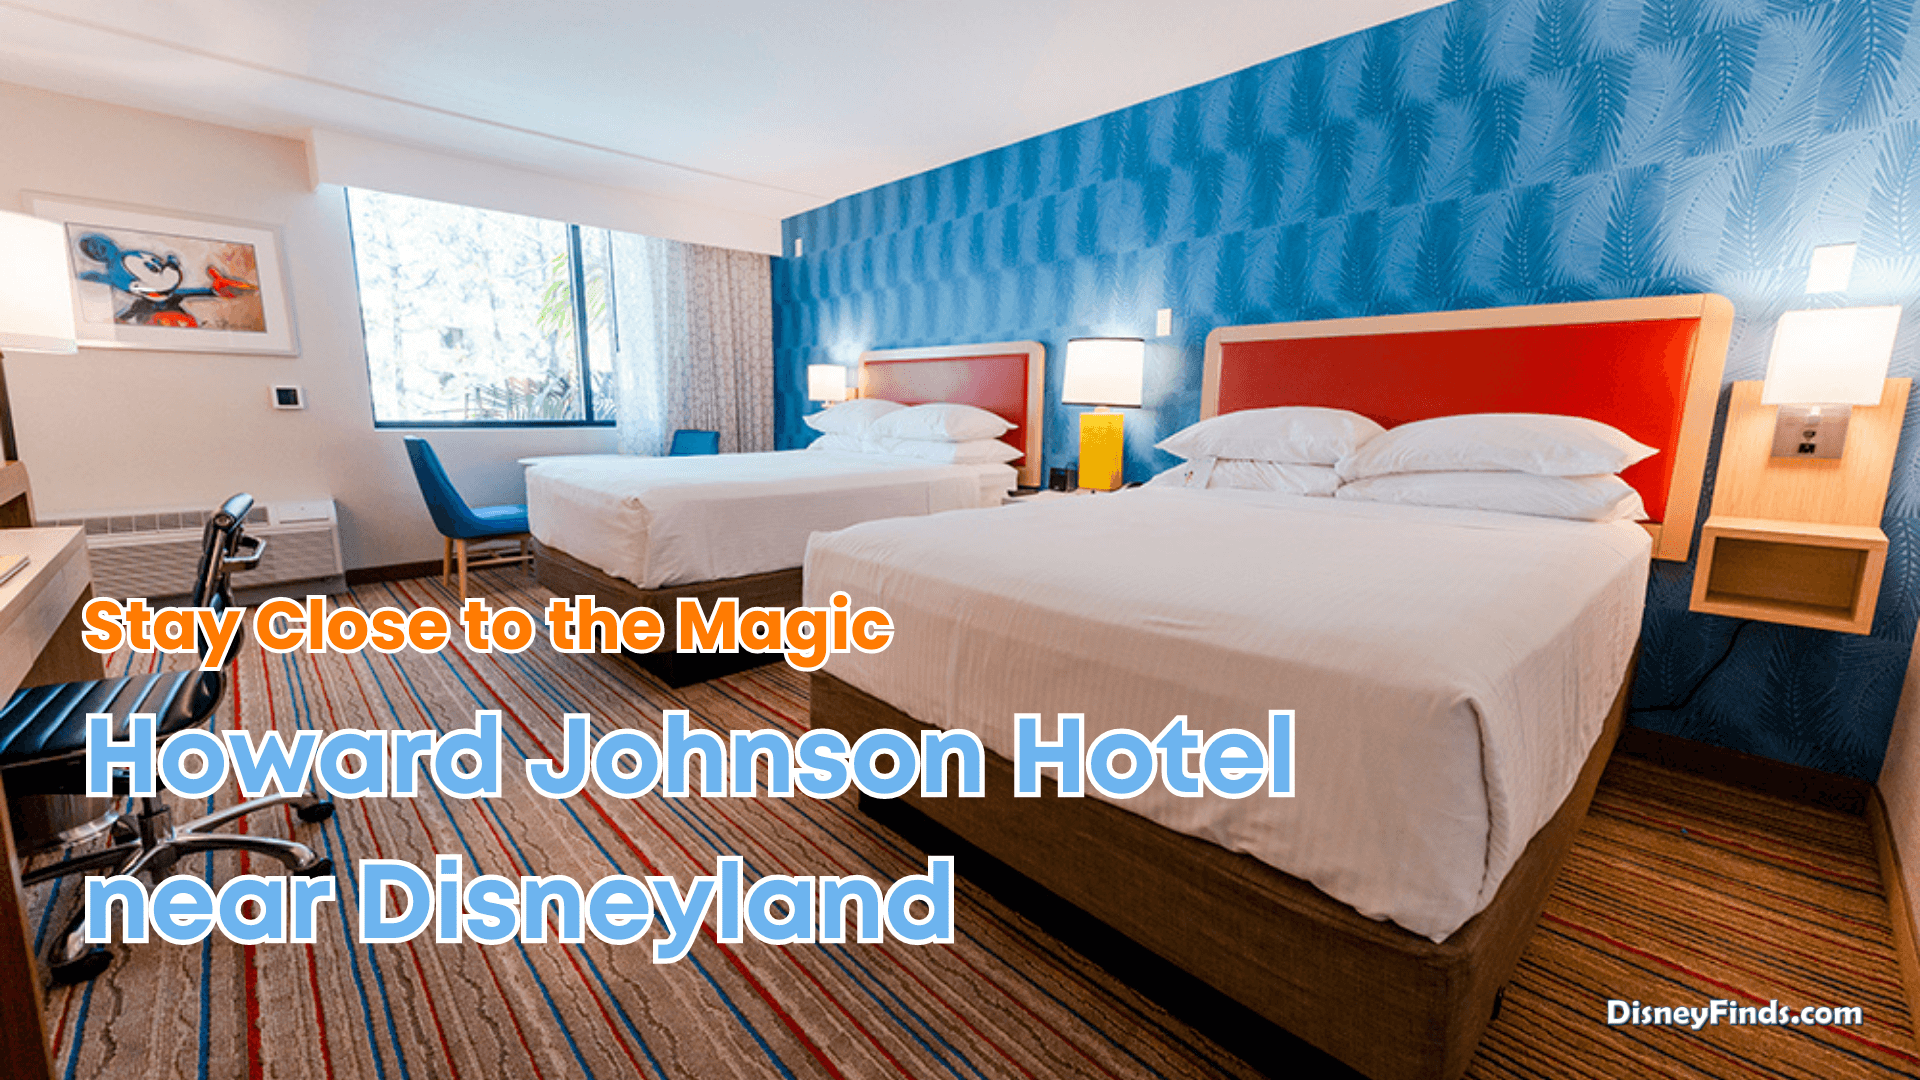 Stay Close to the Magic: Howard Johnson Hotel near Disneyland - Disney  Finds Official